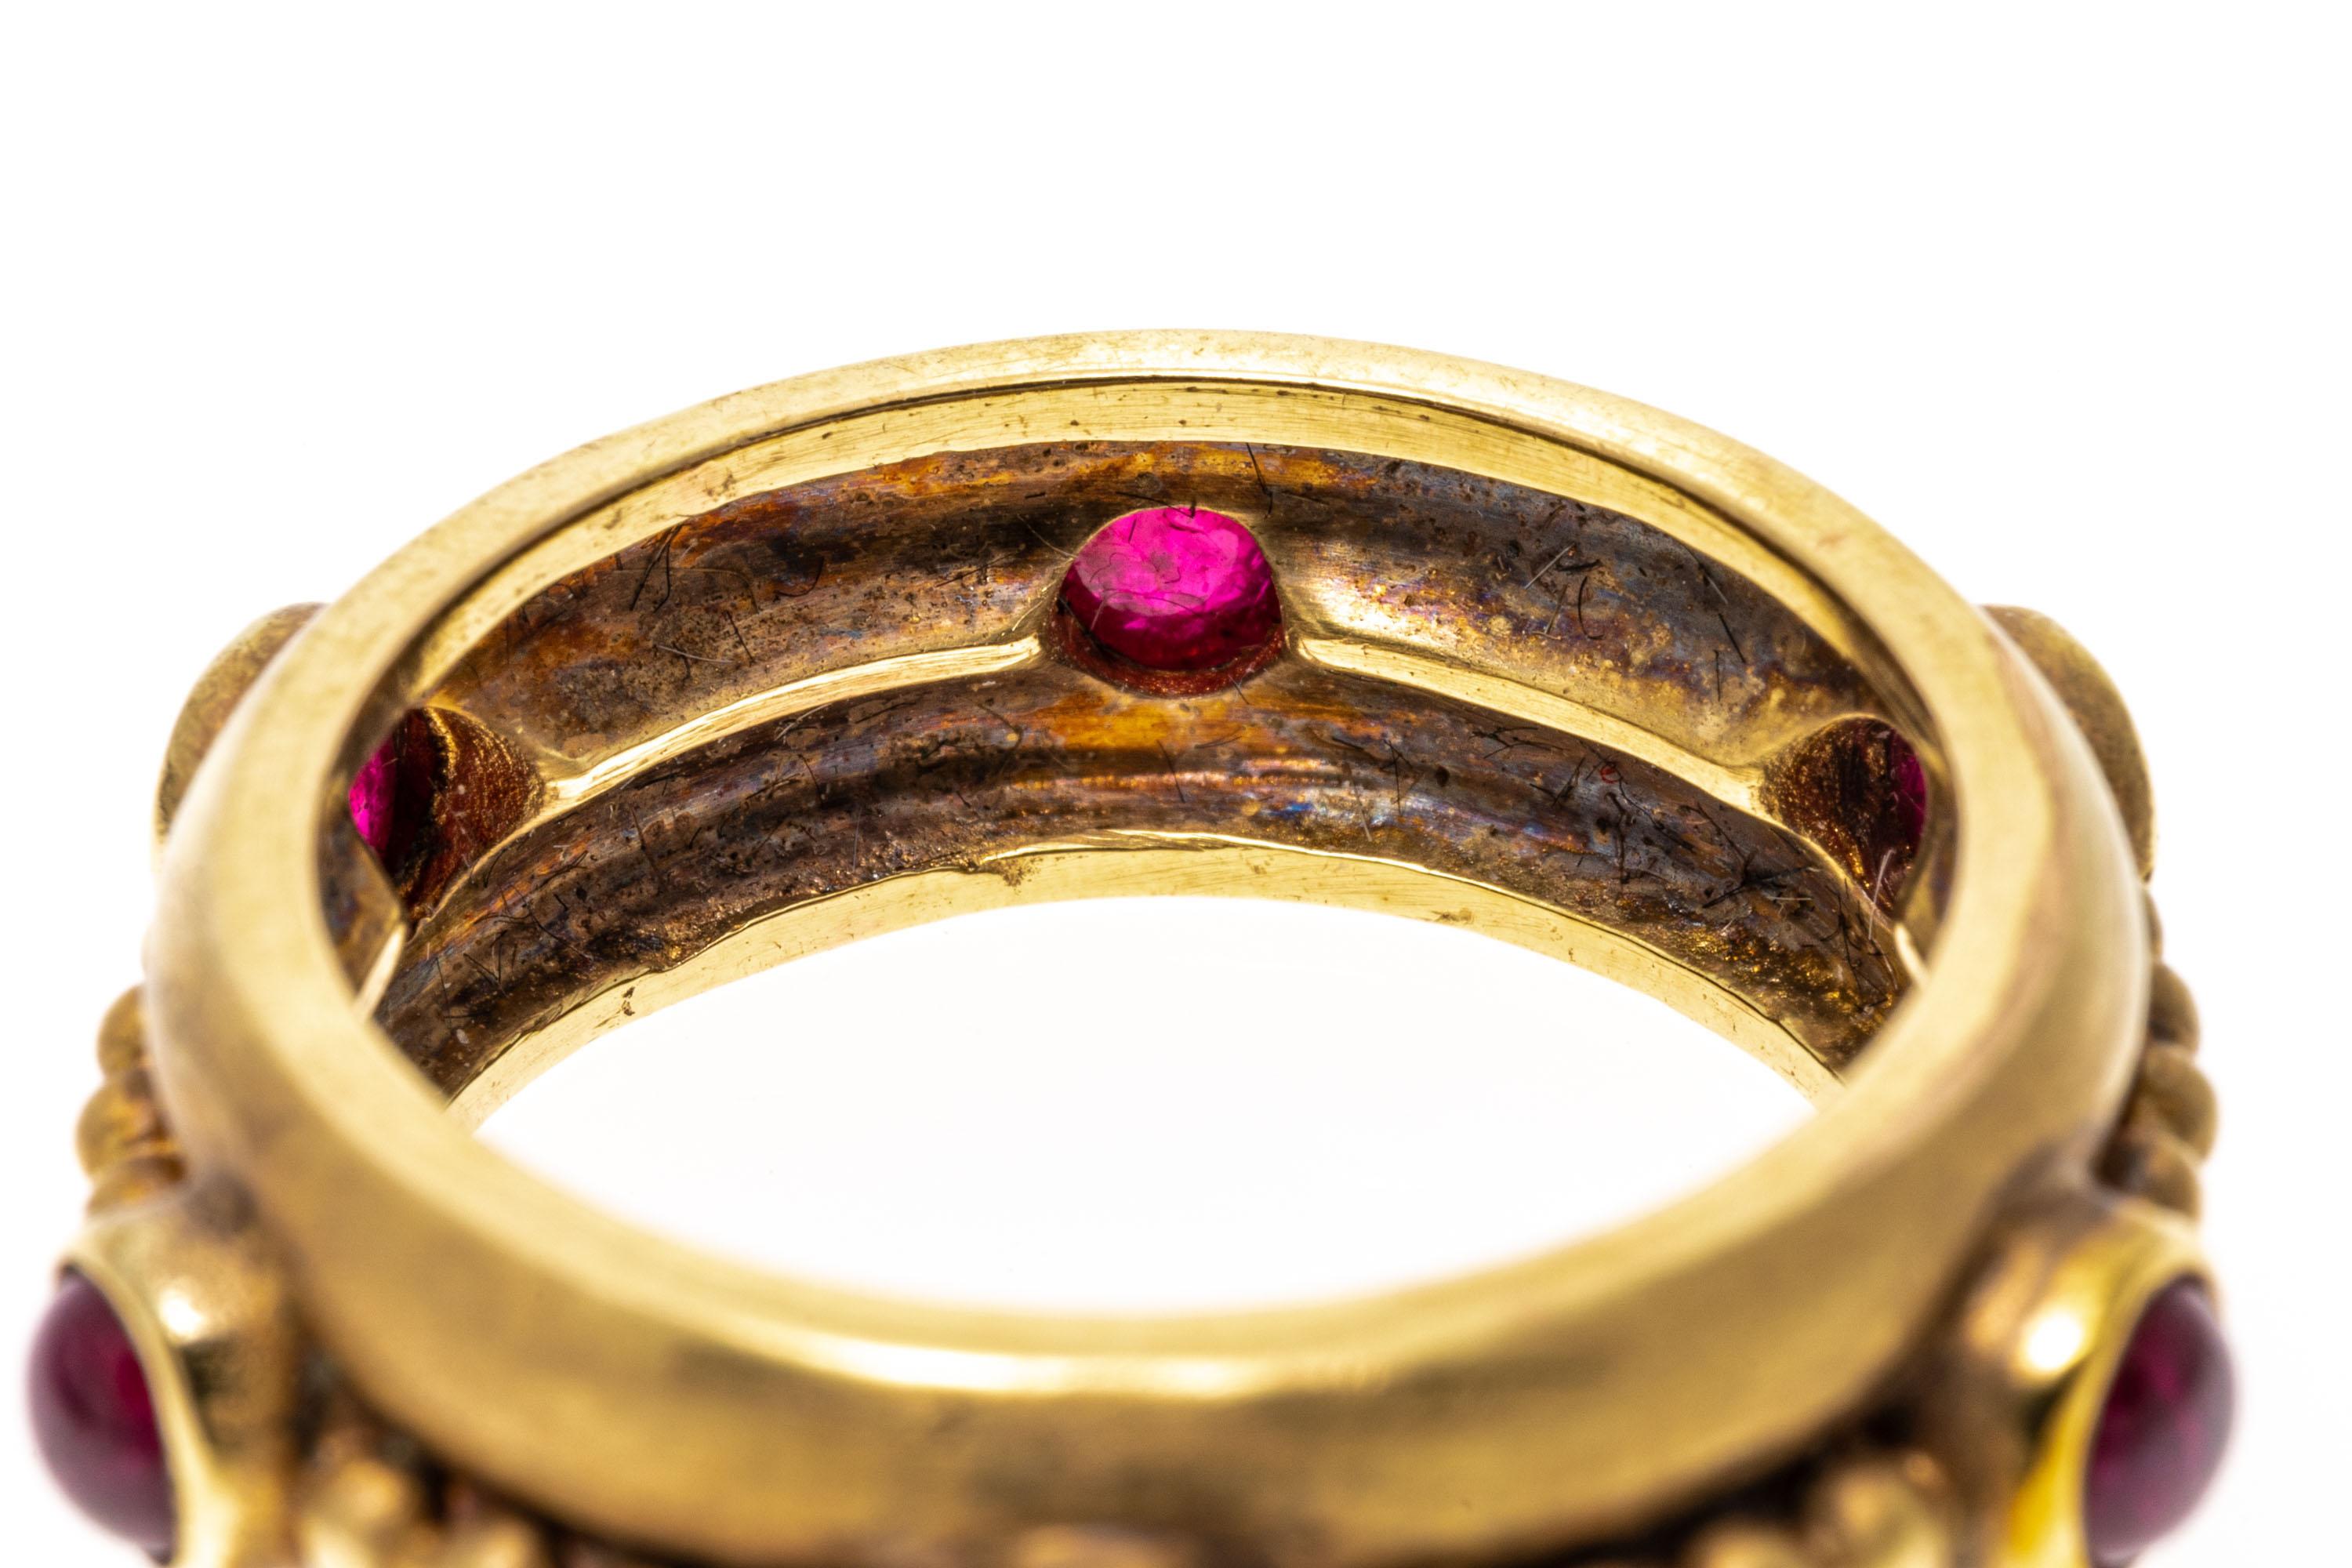 14k yellow gold ring. This striking ring is a matte finished, wide eternity band, with six round red color synthetic ruby cabachons, bezel set and finished by a horizontal bead running through the center.
Marks: None, tests 14k
Dimensions: 9/32